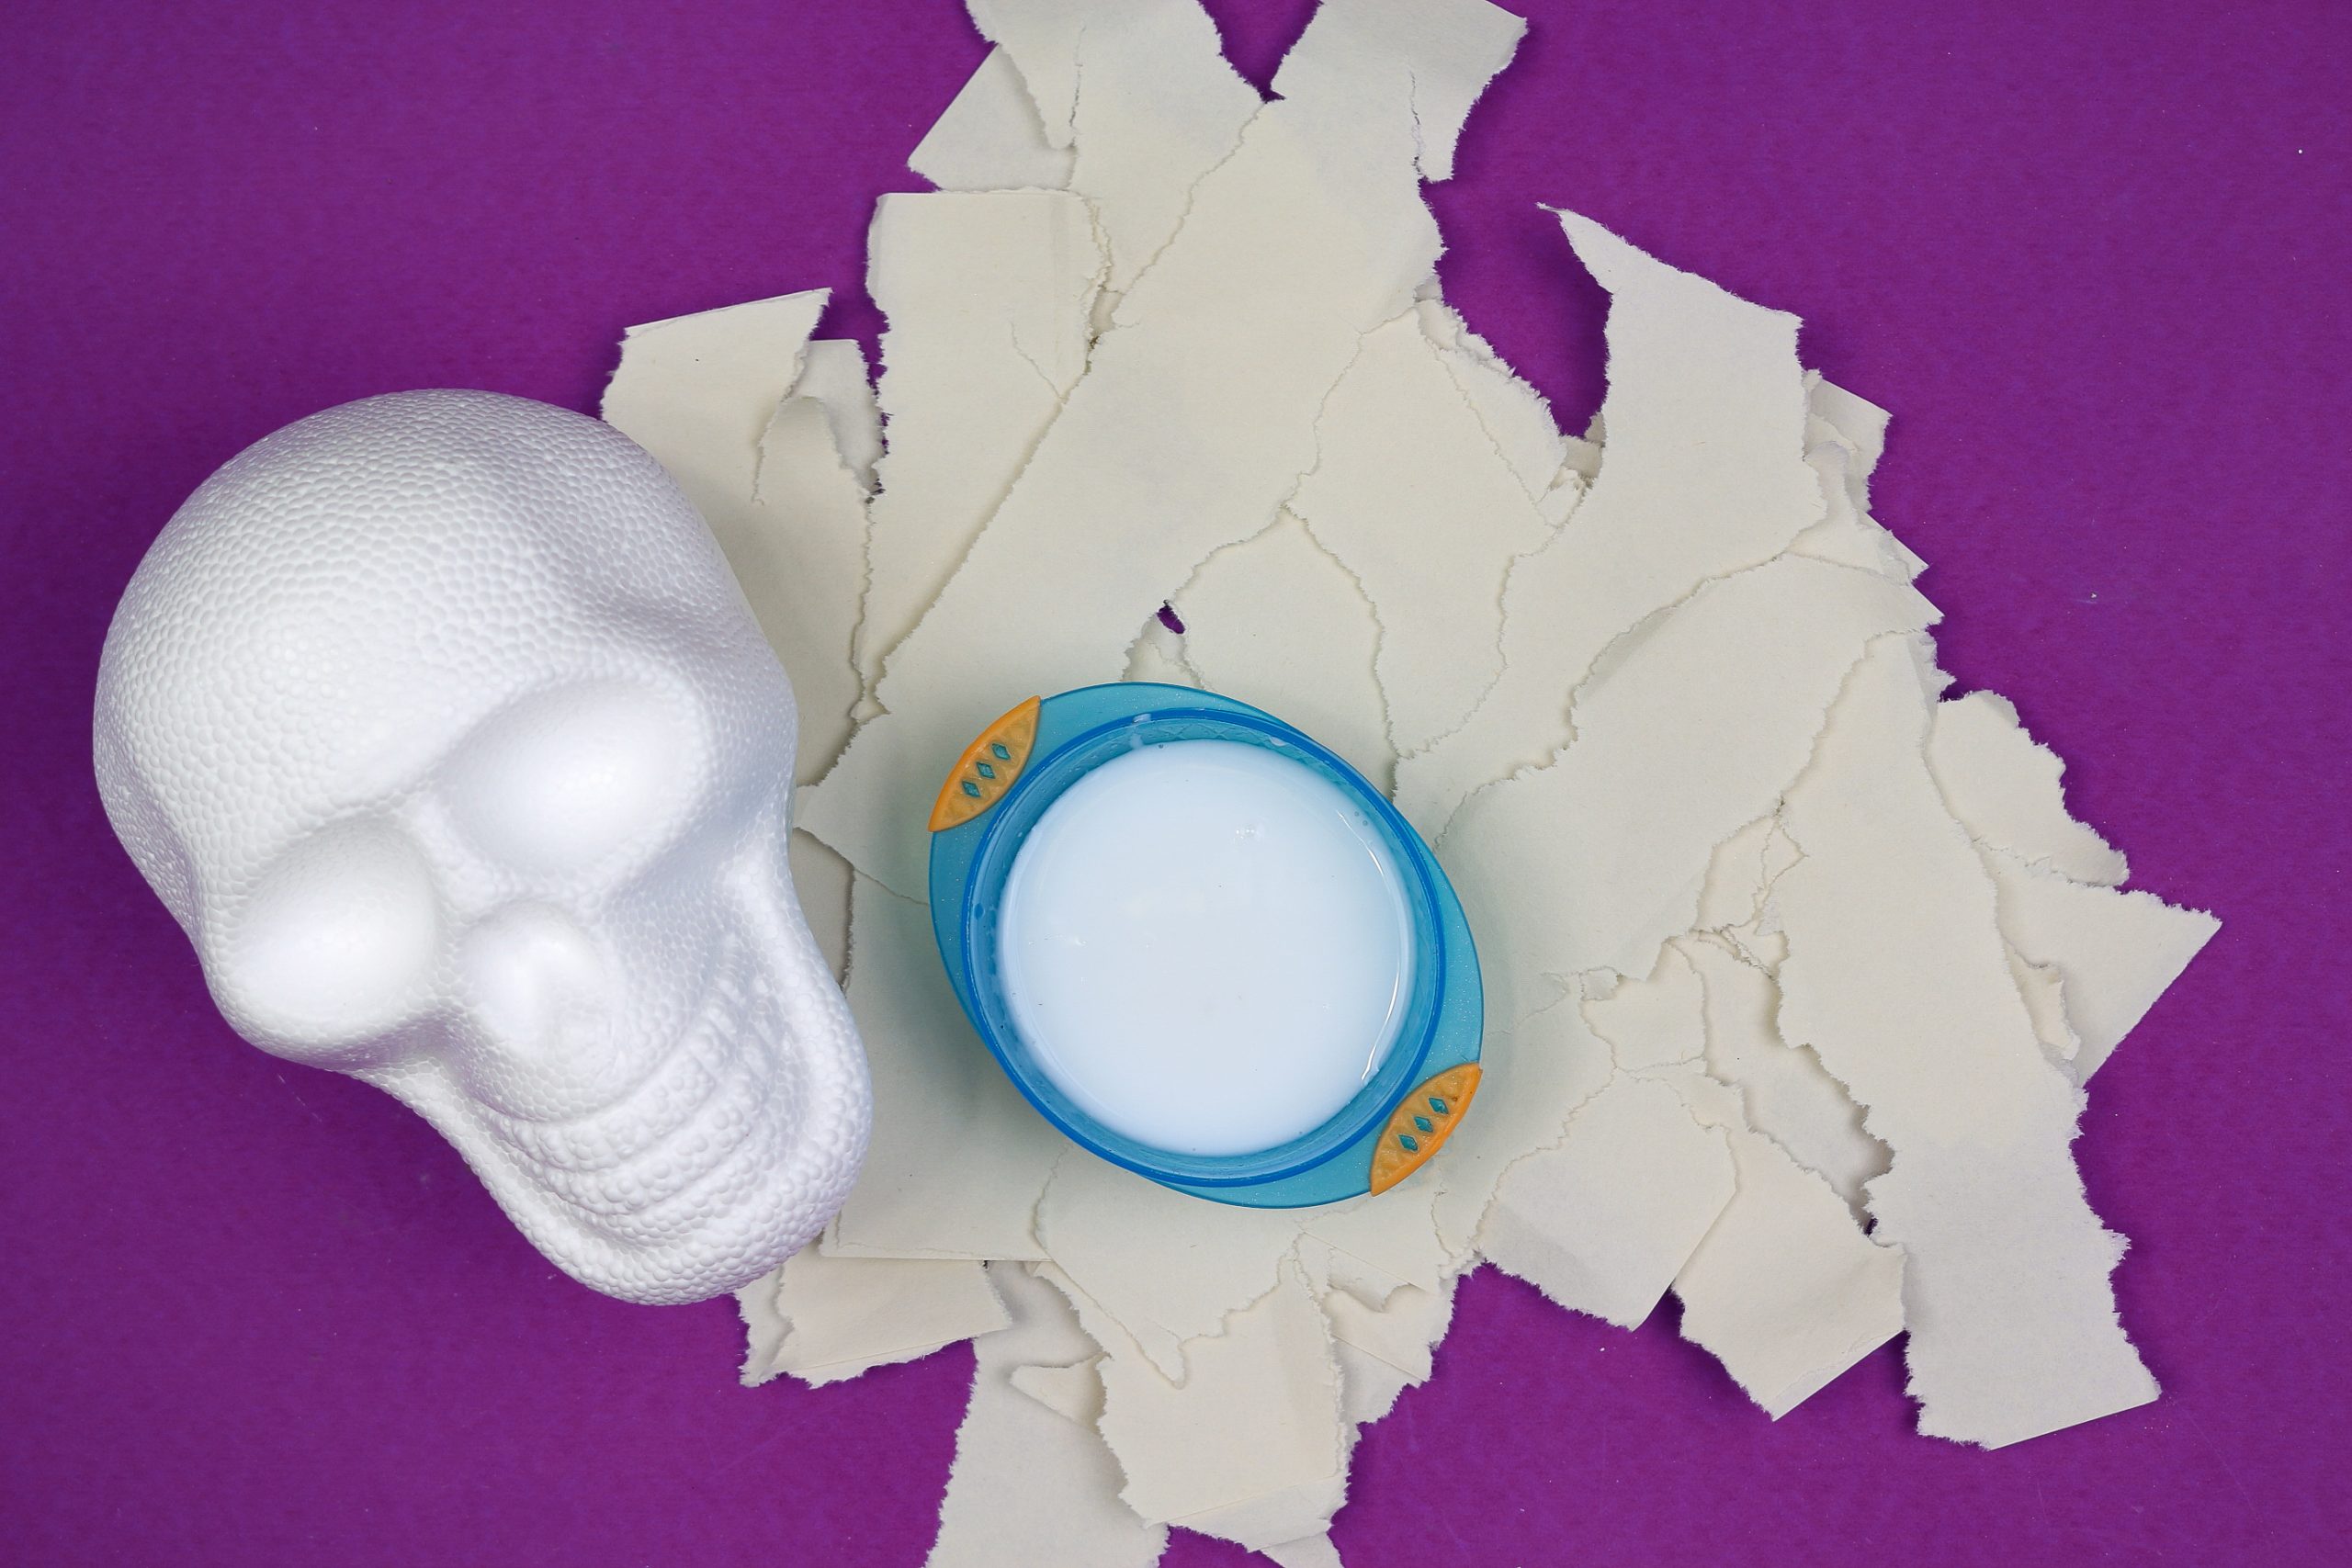 foam skull, ripped construction paper, and diluted white glue on a purple background